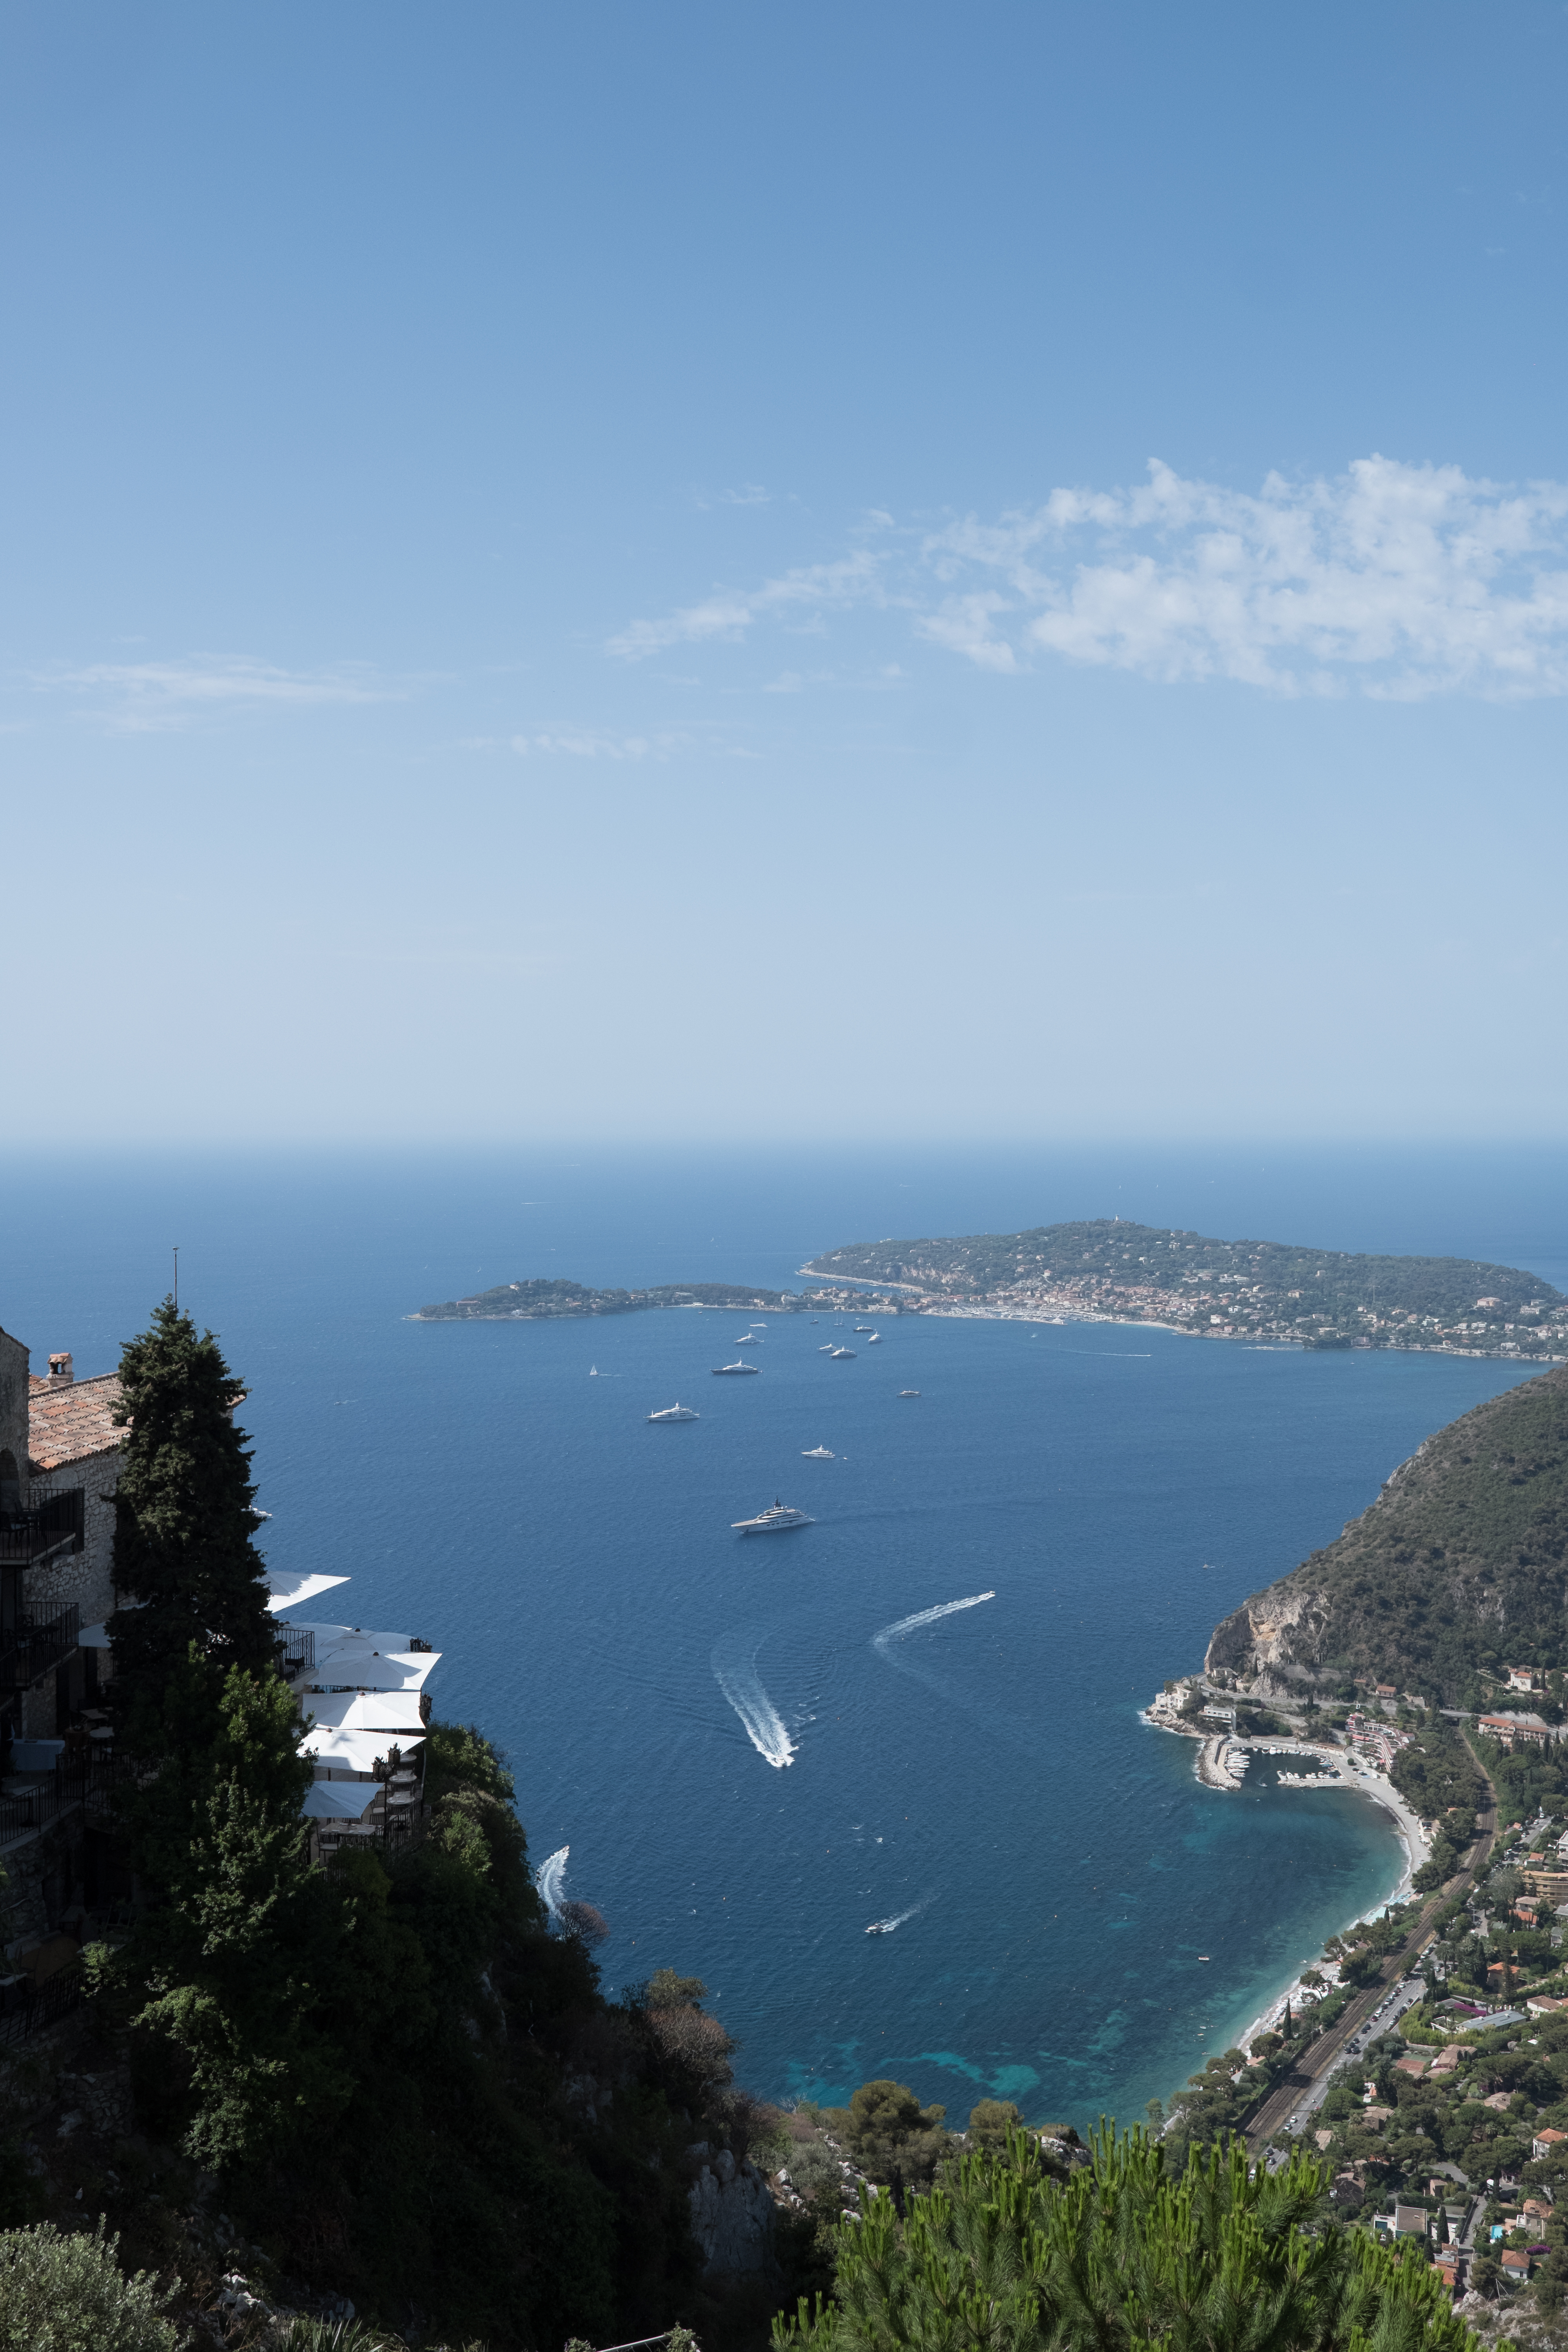 Eze - One of the most beautiful towns in the South of France /Photo Credit Sonia Mota